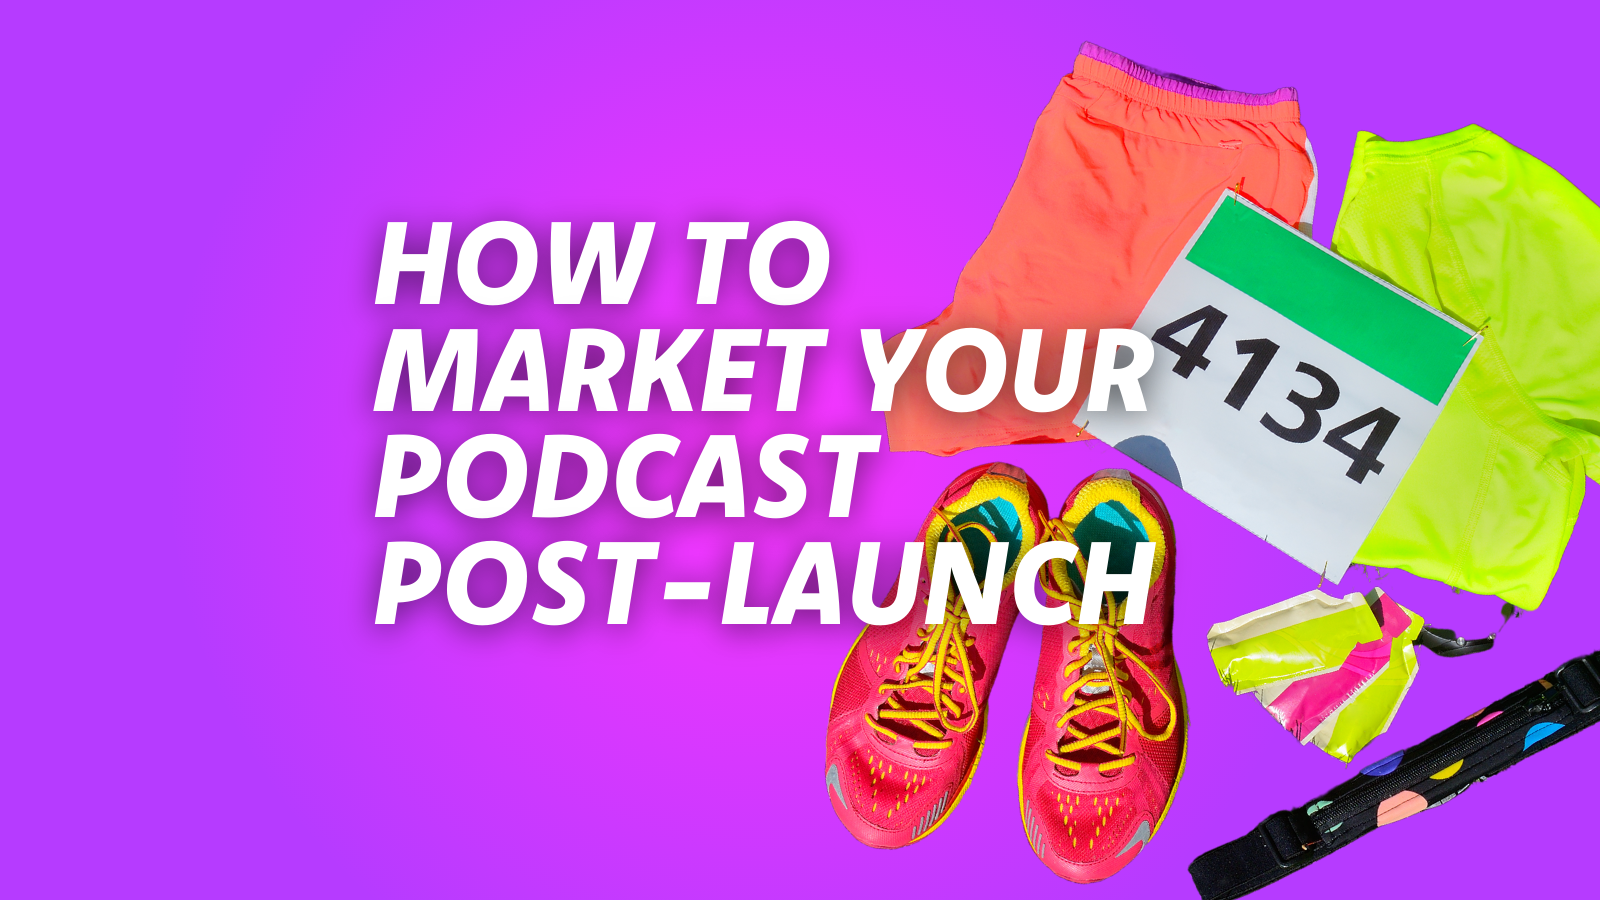 Post-Launch: How to Keep Up Your Podcast’s Momentum with Marketing